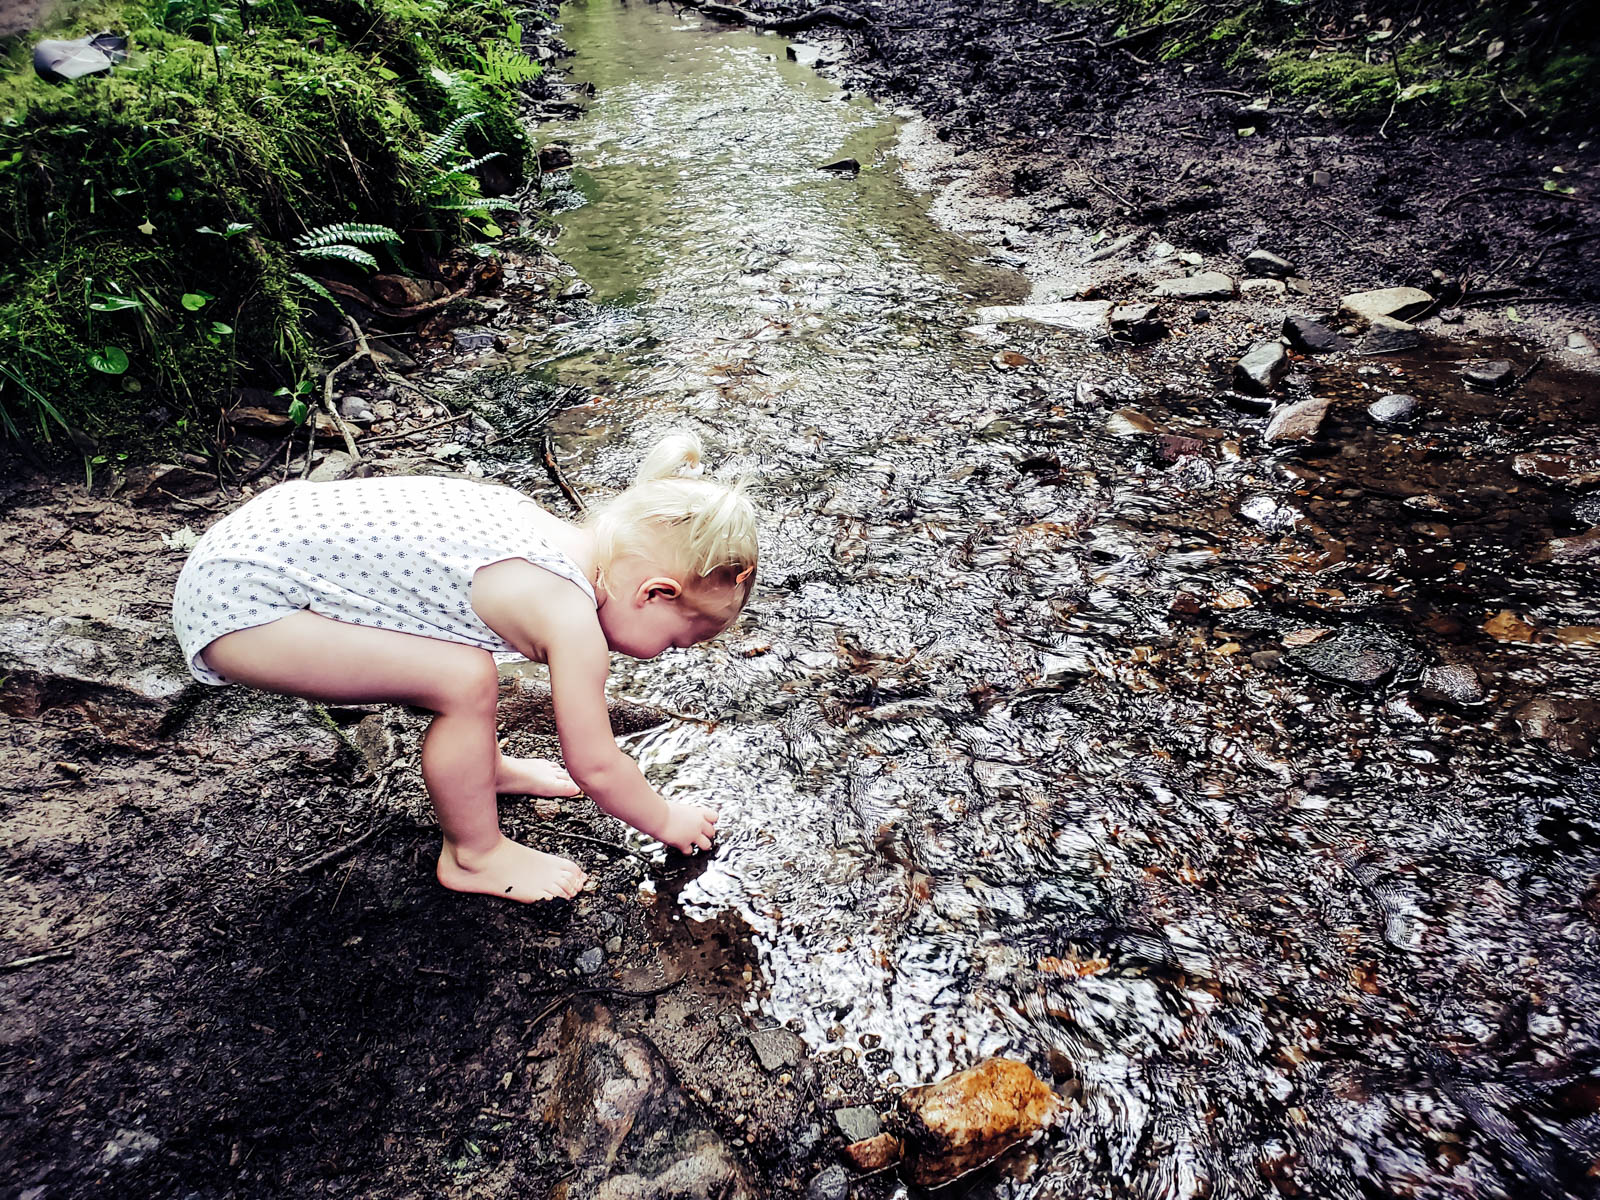 Playing in the stream on our hike